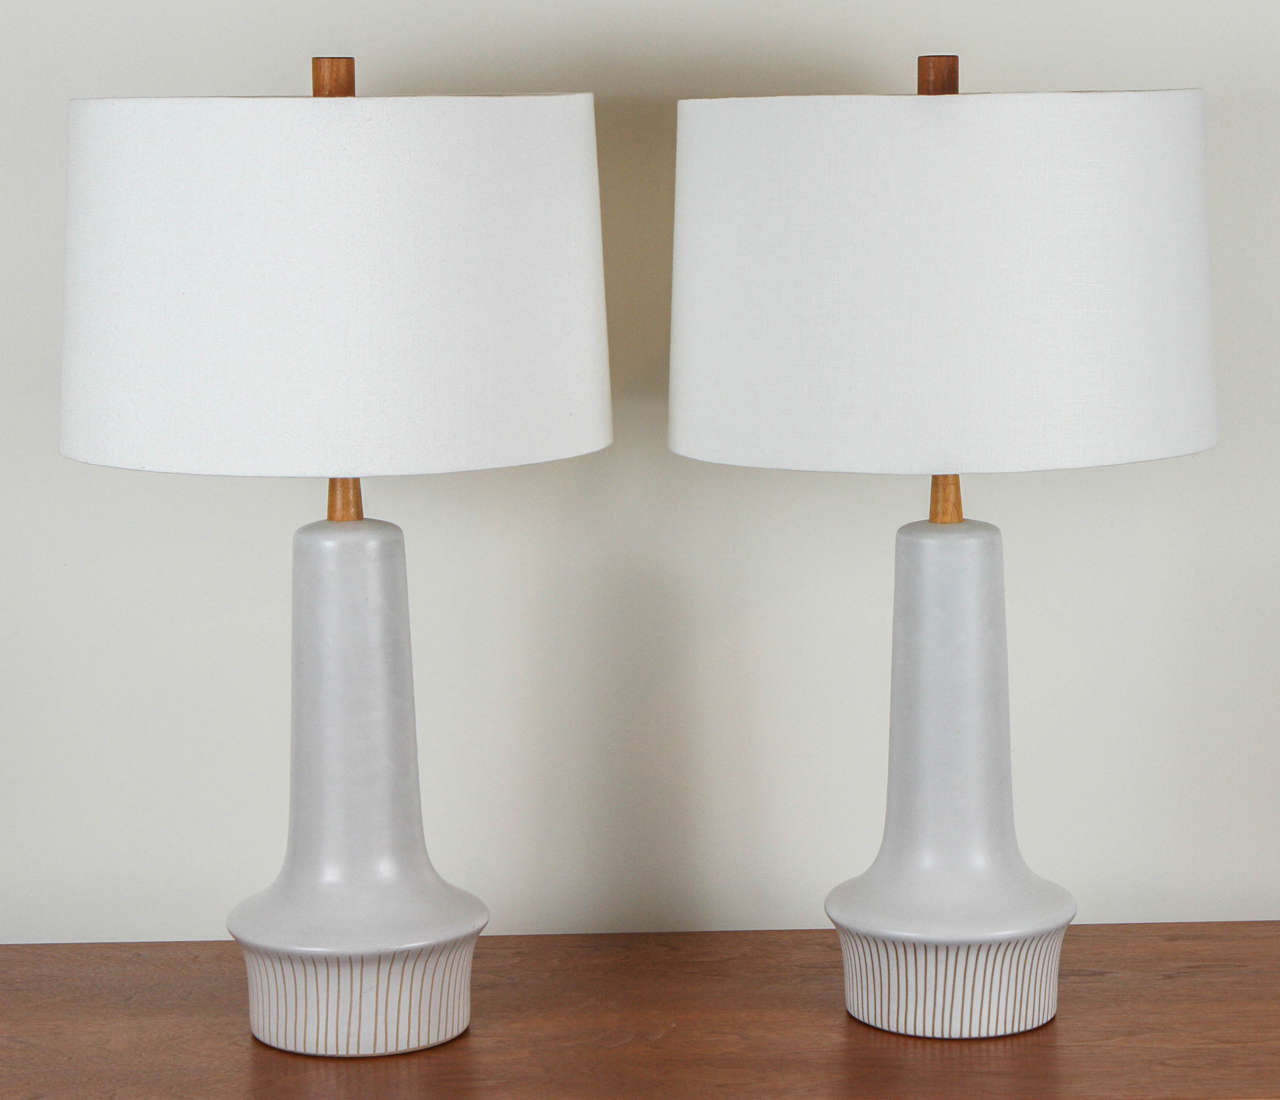 Pair of ceramic Martz lamps with sgraffito striped base.